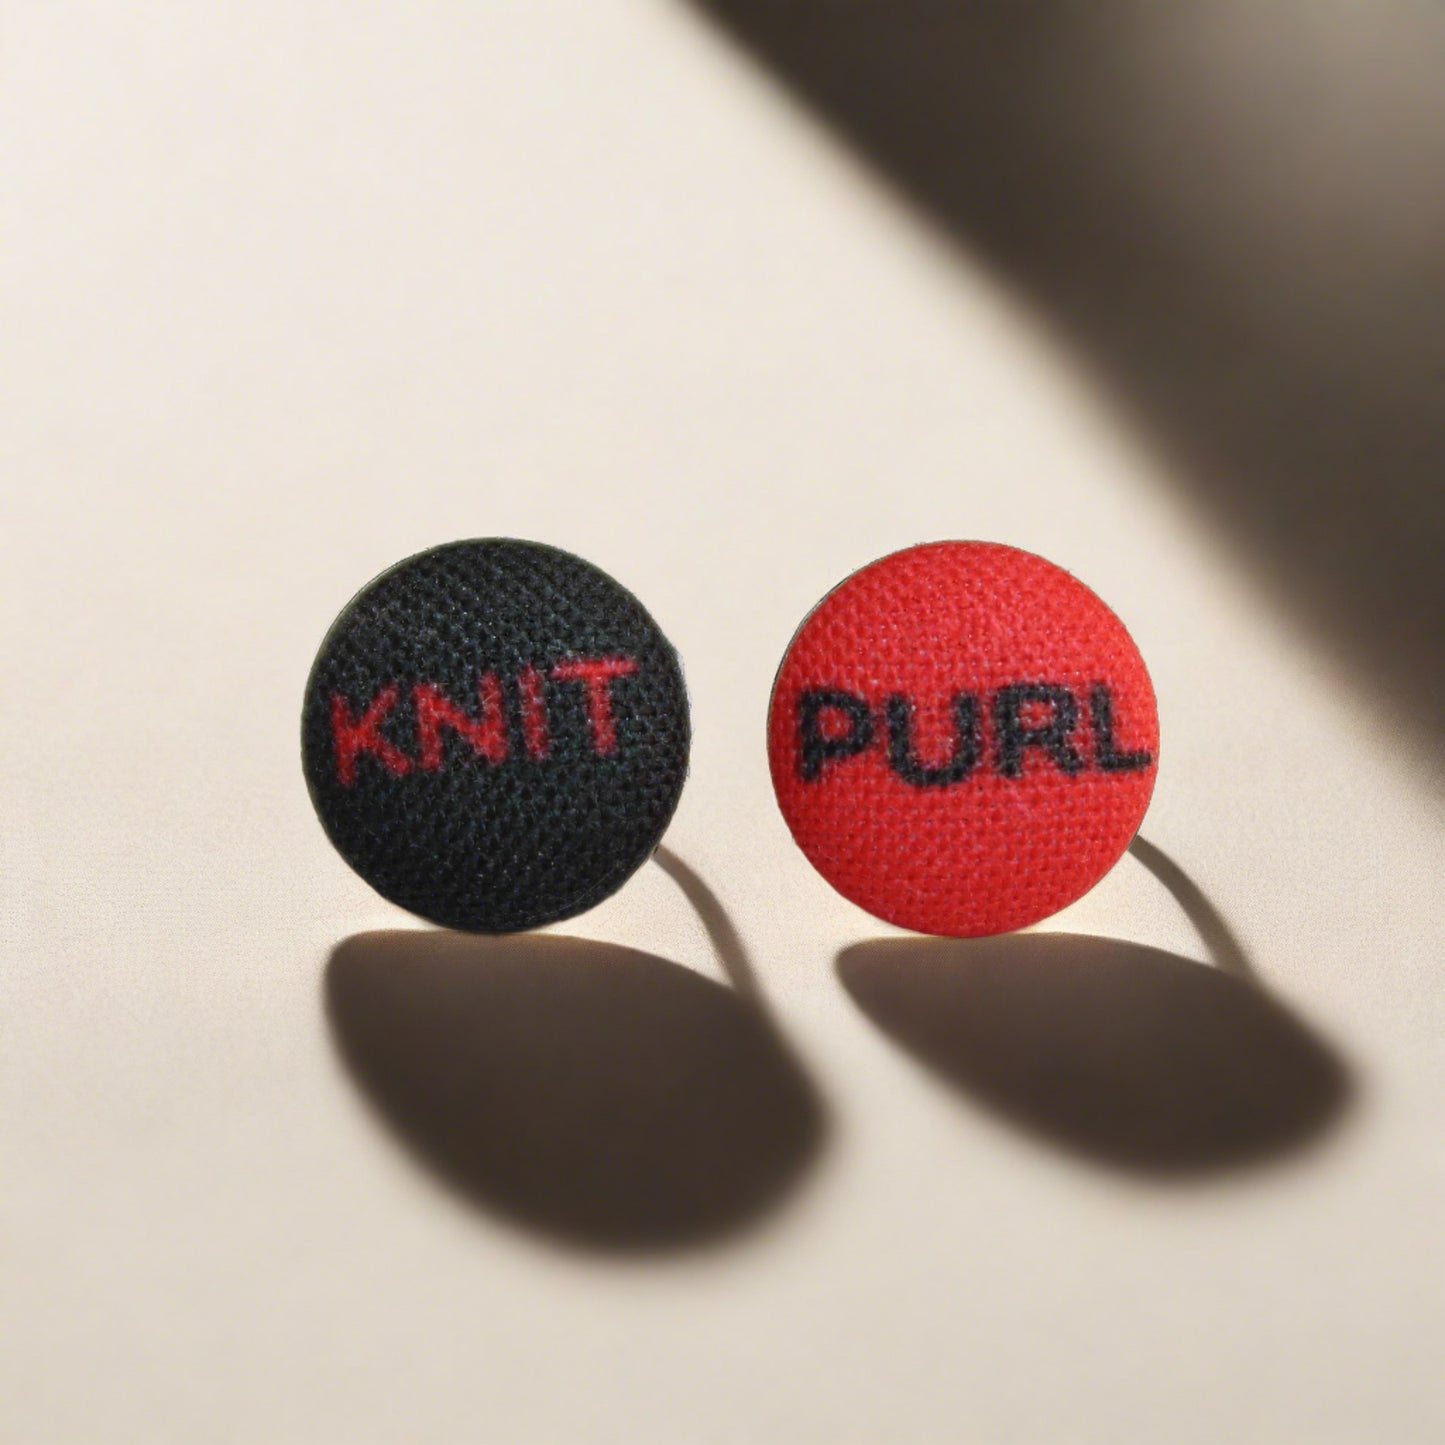 Knit Purl Punk Knitter (small) Fabric button Stud Earrings